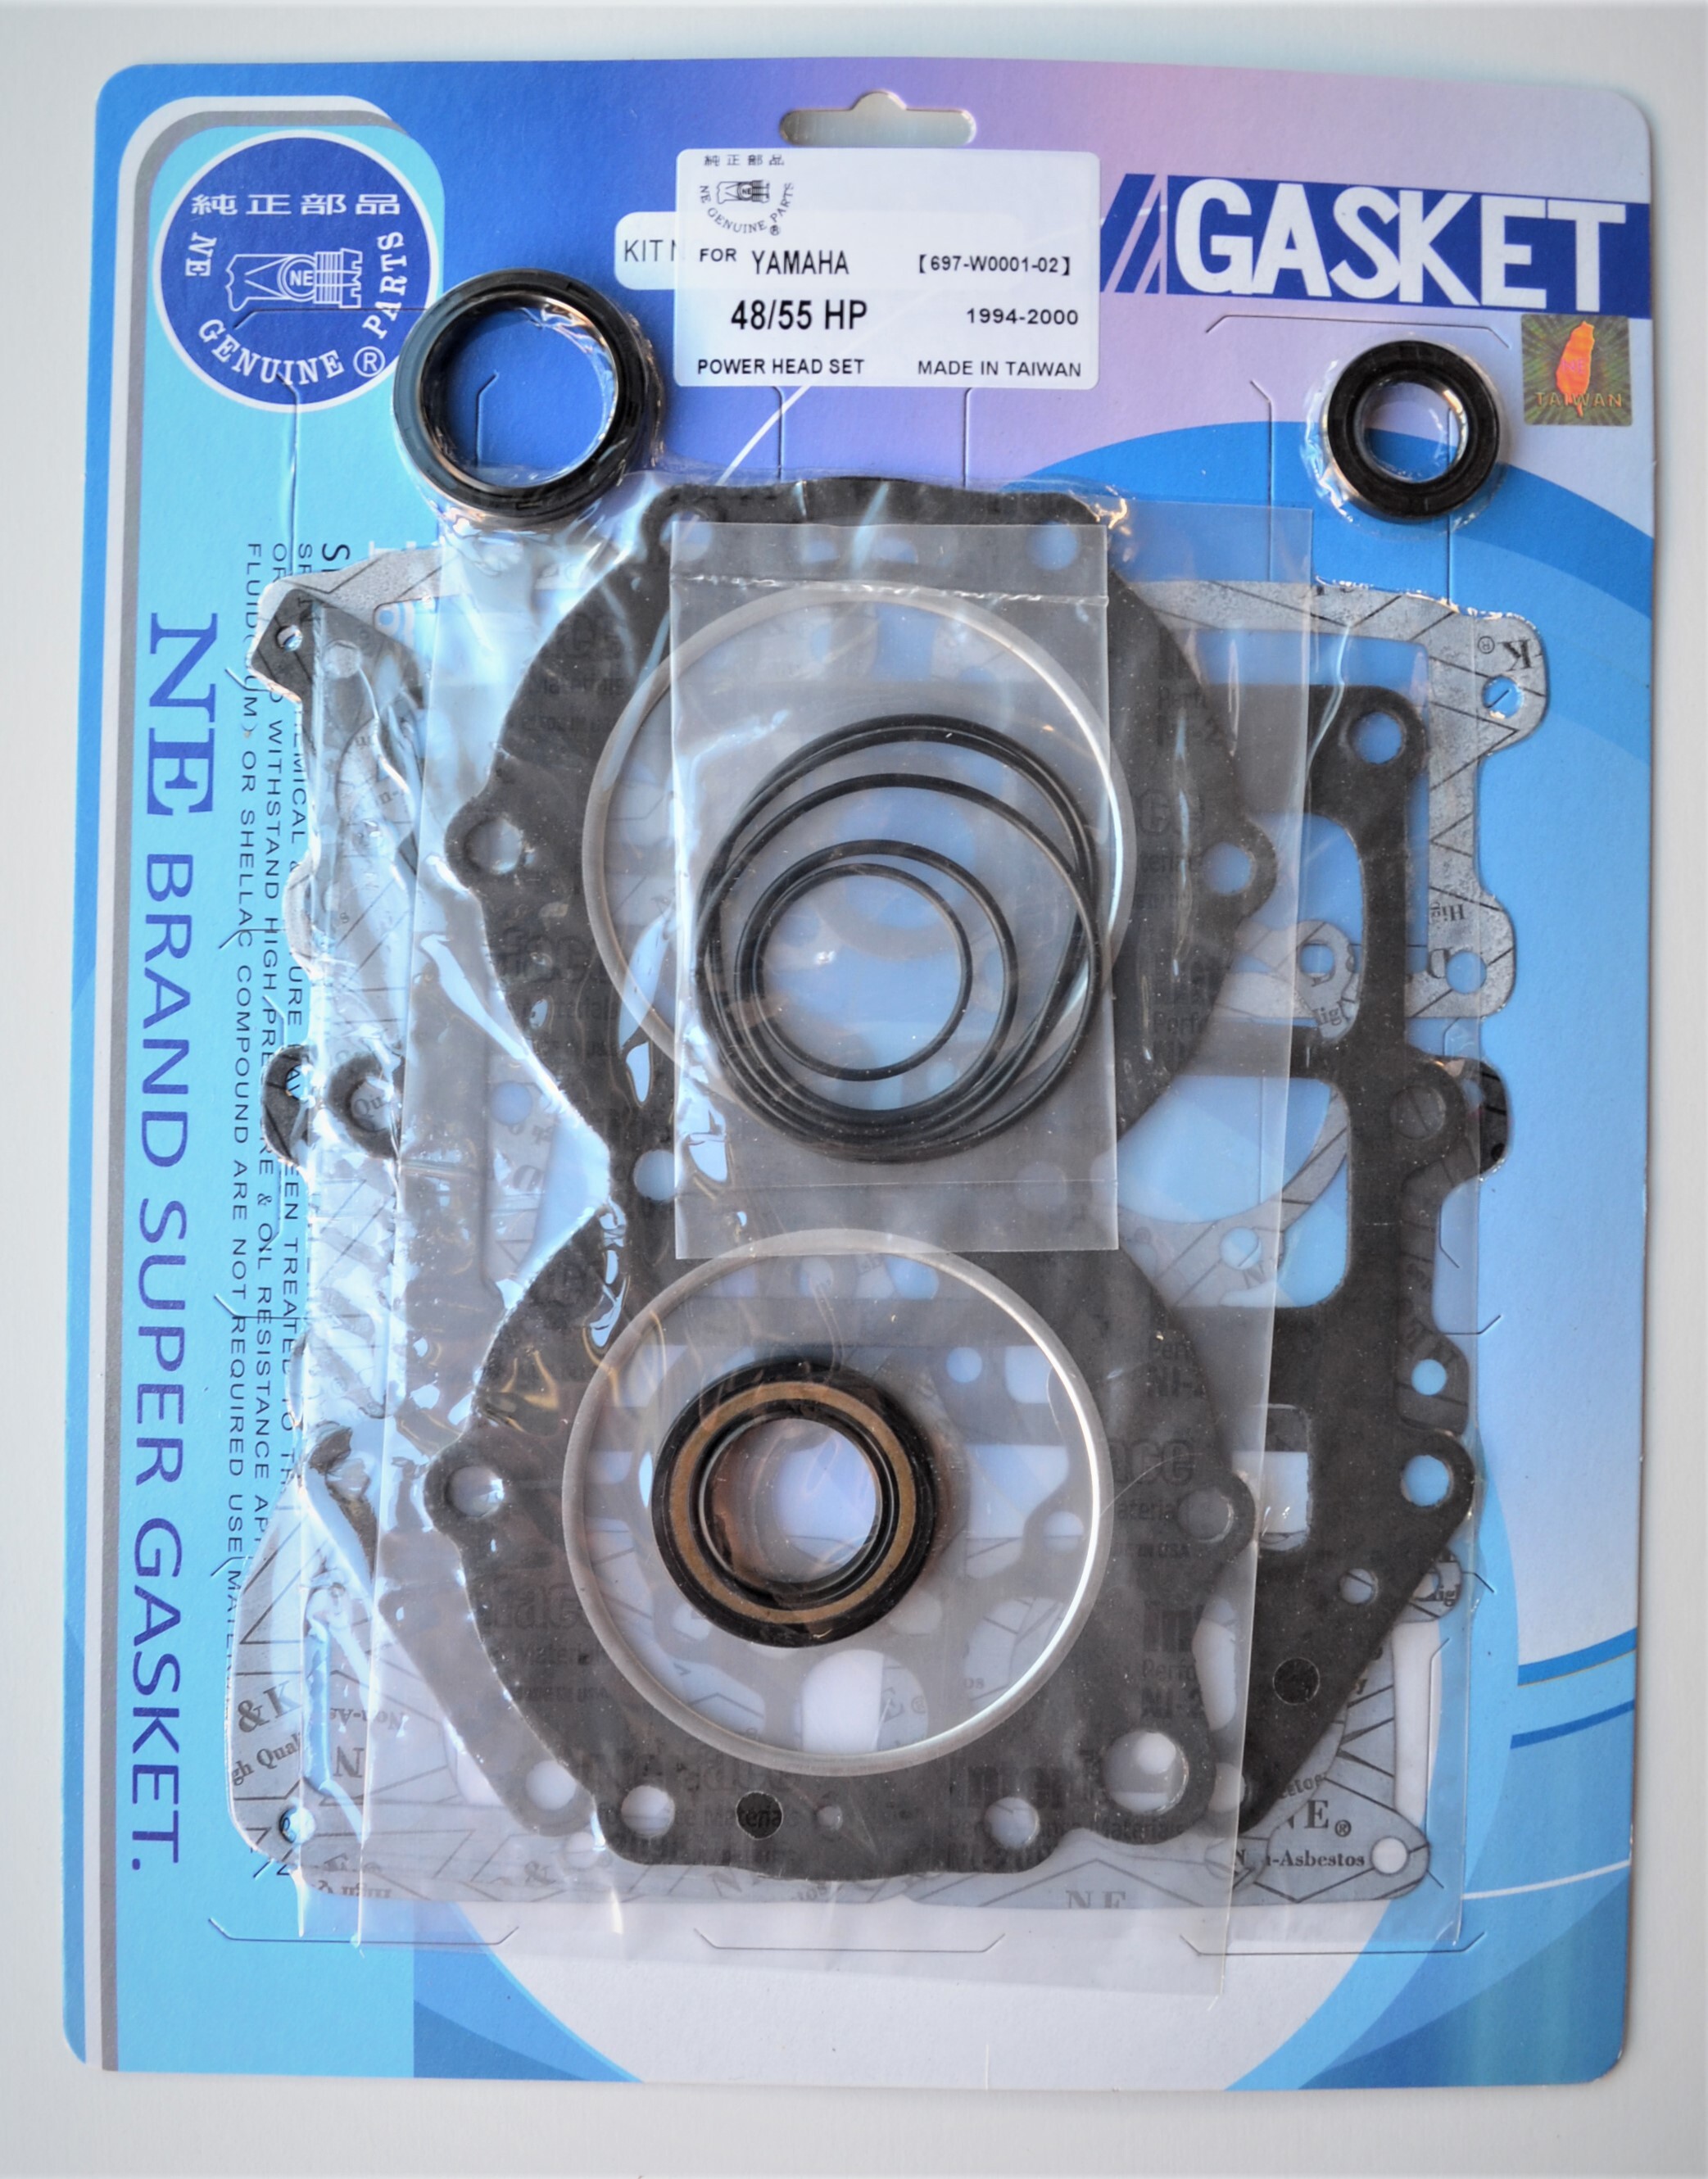 POWER HEAD GASKET KIT FOR YAMAHA 48 - 55HP 1994 - 2000 C55ELRSC55ELRTE48MLHTE48MLHY Outboard Motors 697 - W0001 - 02 / 697 - W0001 - A2